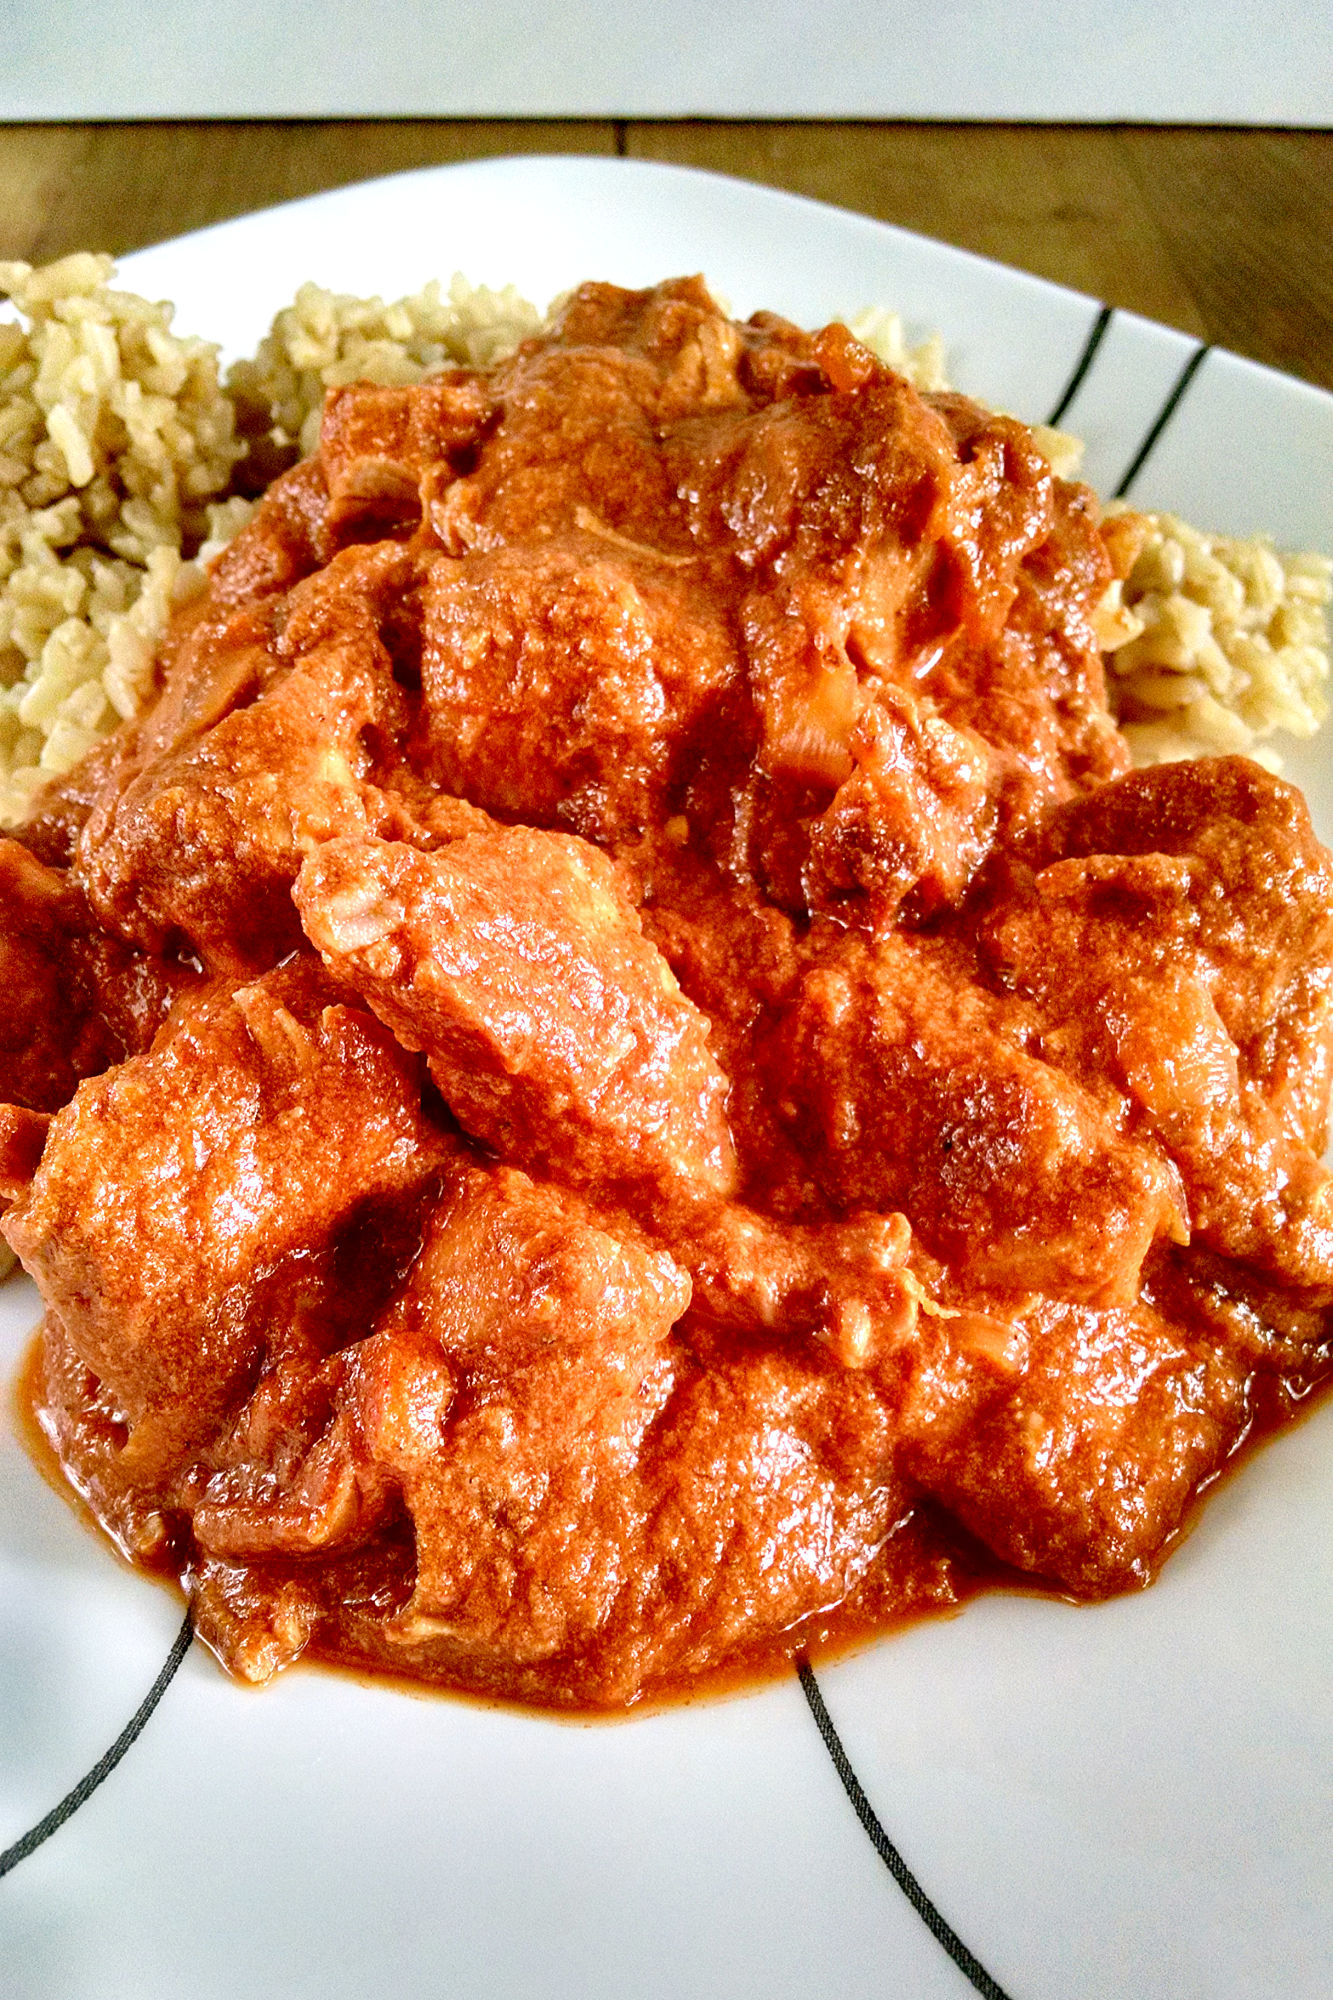 Turn up the heat with this mouthwatering slow cooker chicken tikka masala recipe! Perfect for busy weeknights or lazy Sundays. #OurFamilyTable #SpiceUpYourDinner #CrockpotCooking #EasyIndianRecipes #DinnerMadeEasy #DeliciousDinnerIdeas
